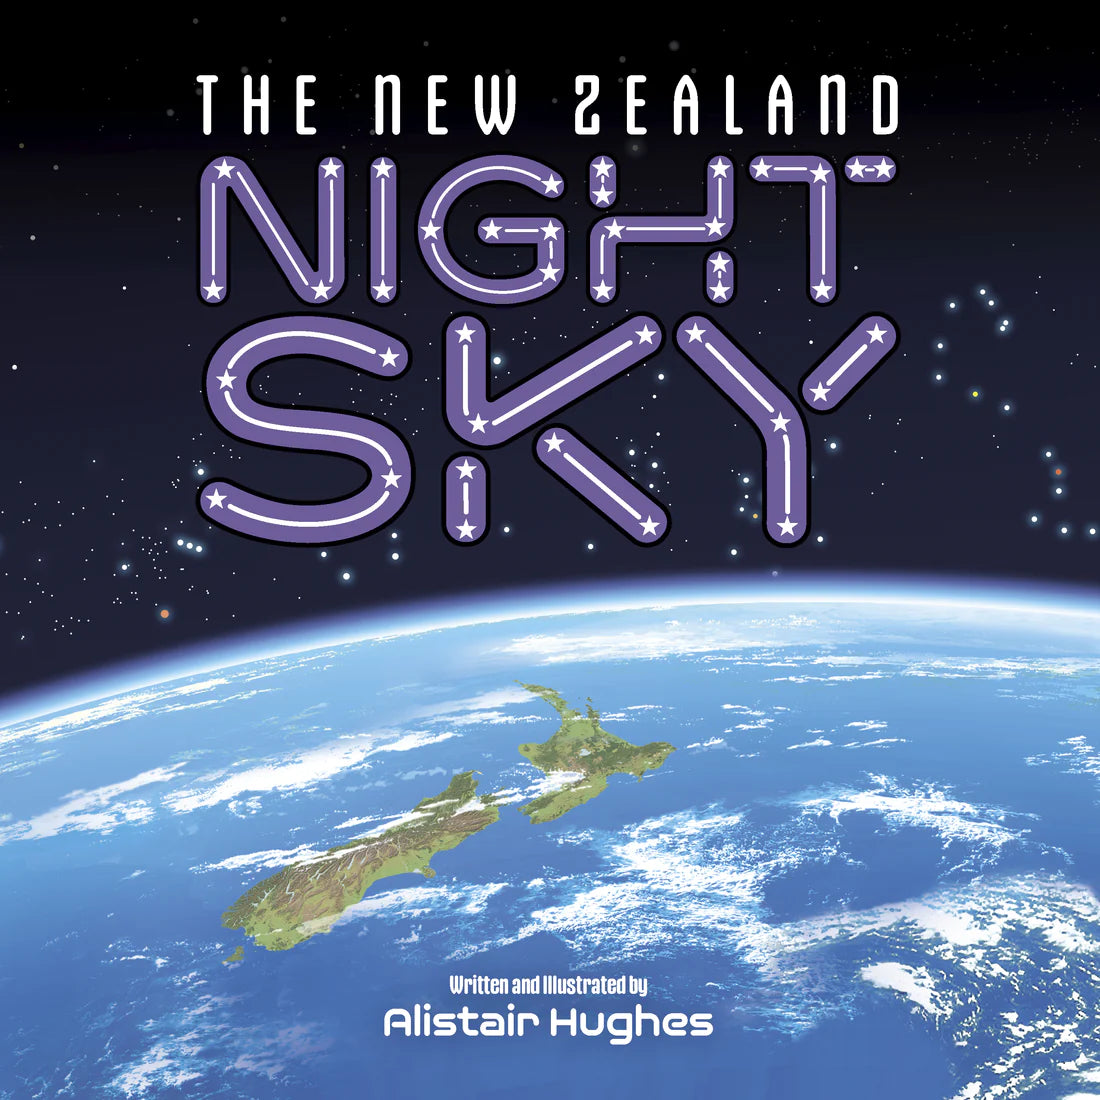 The New Zealand Night Sky by Alistair Hughes